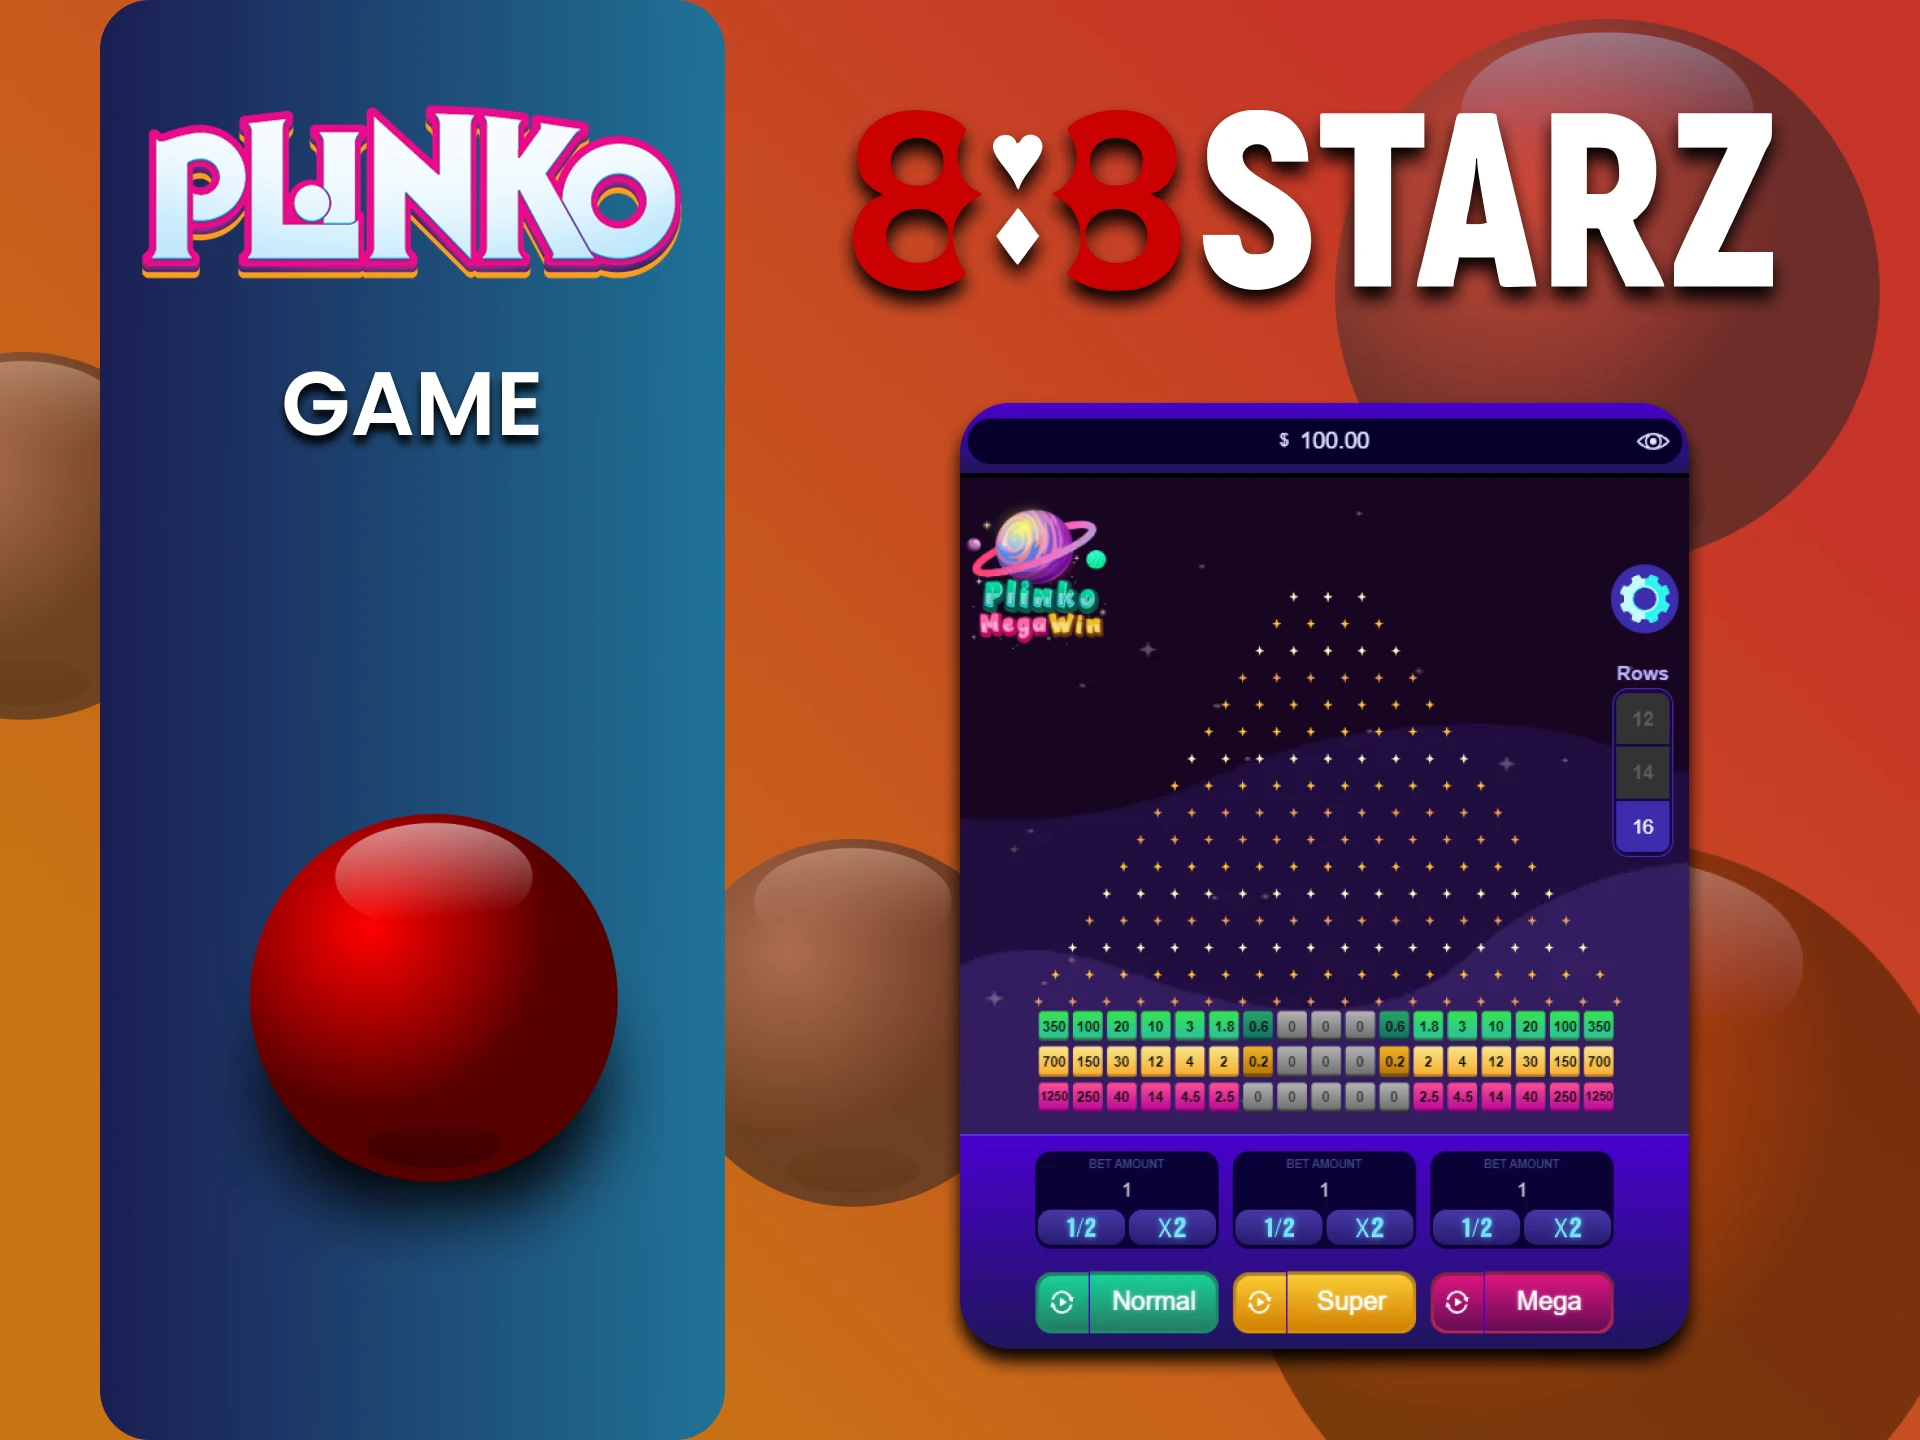 We tell you all about playing Plinko at 888starz.